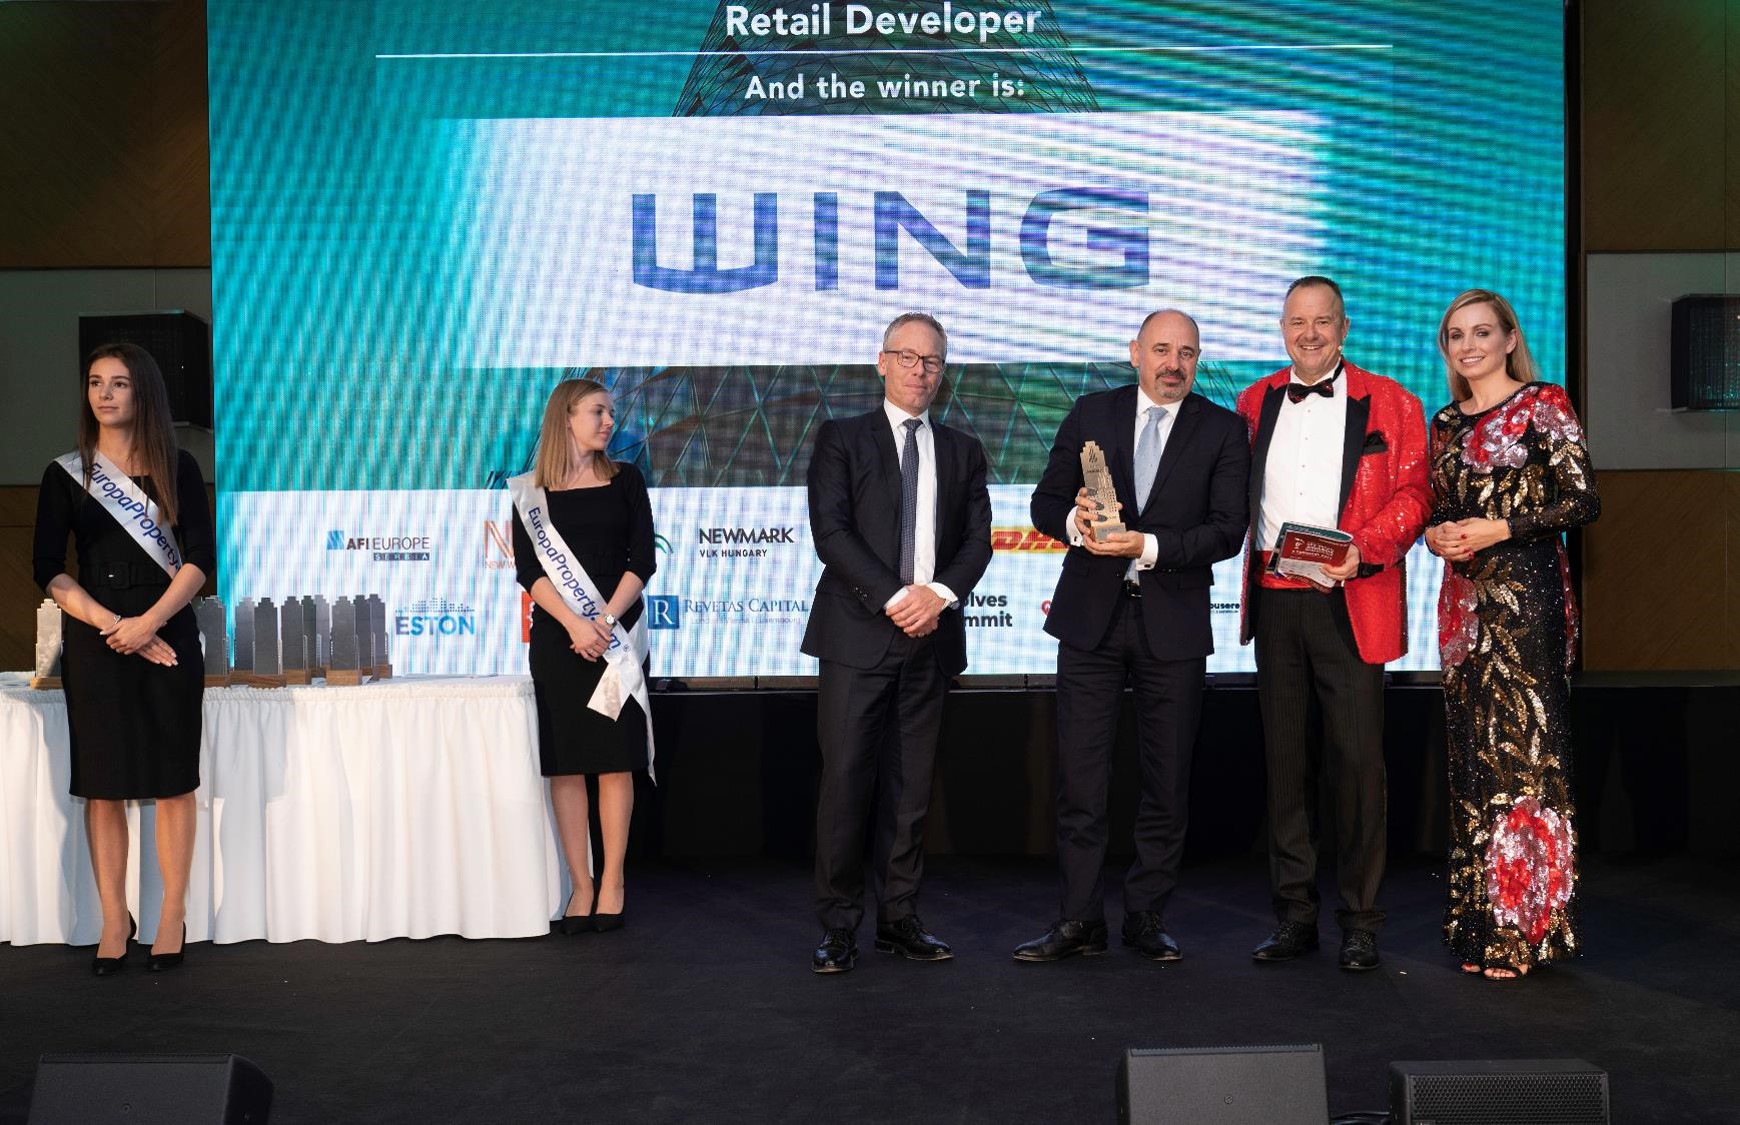 CRE Awards: WING ranked 1st in three categories